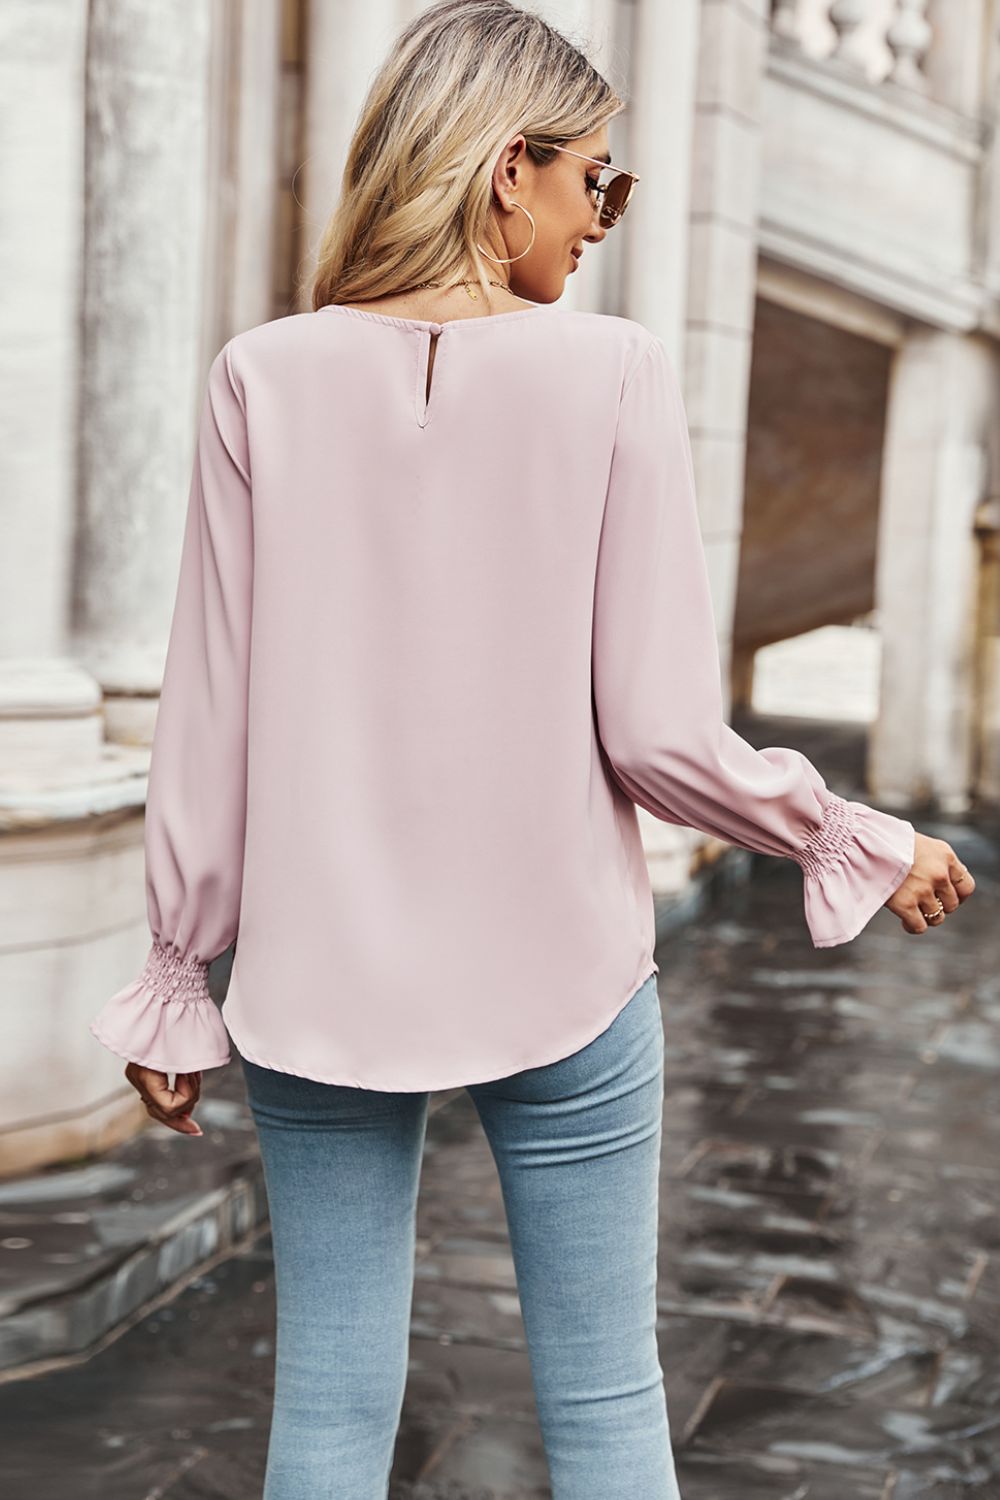 Women's Round Neck Long Flounce Sleeve Blouse with Smocked Wrists in Blush Pink, Key Hole Back Closure